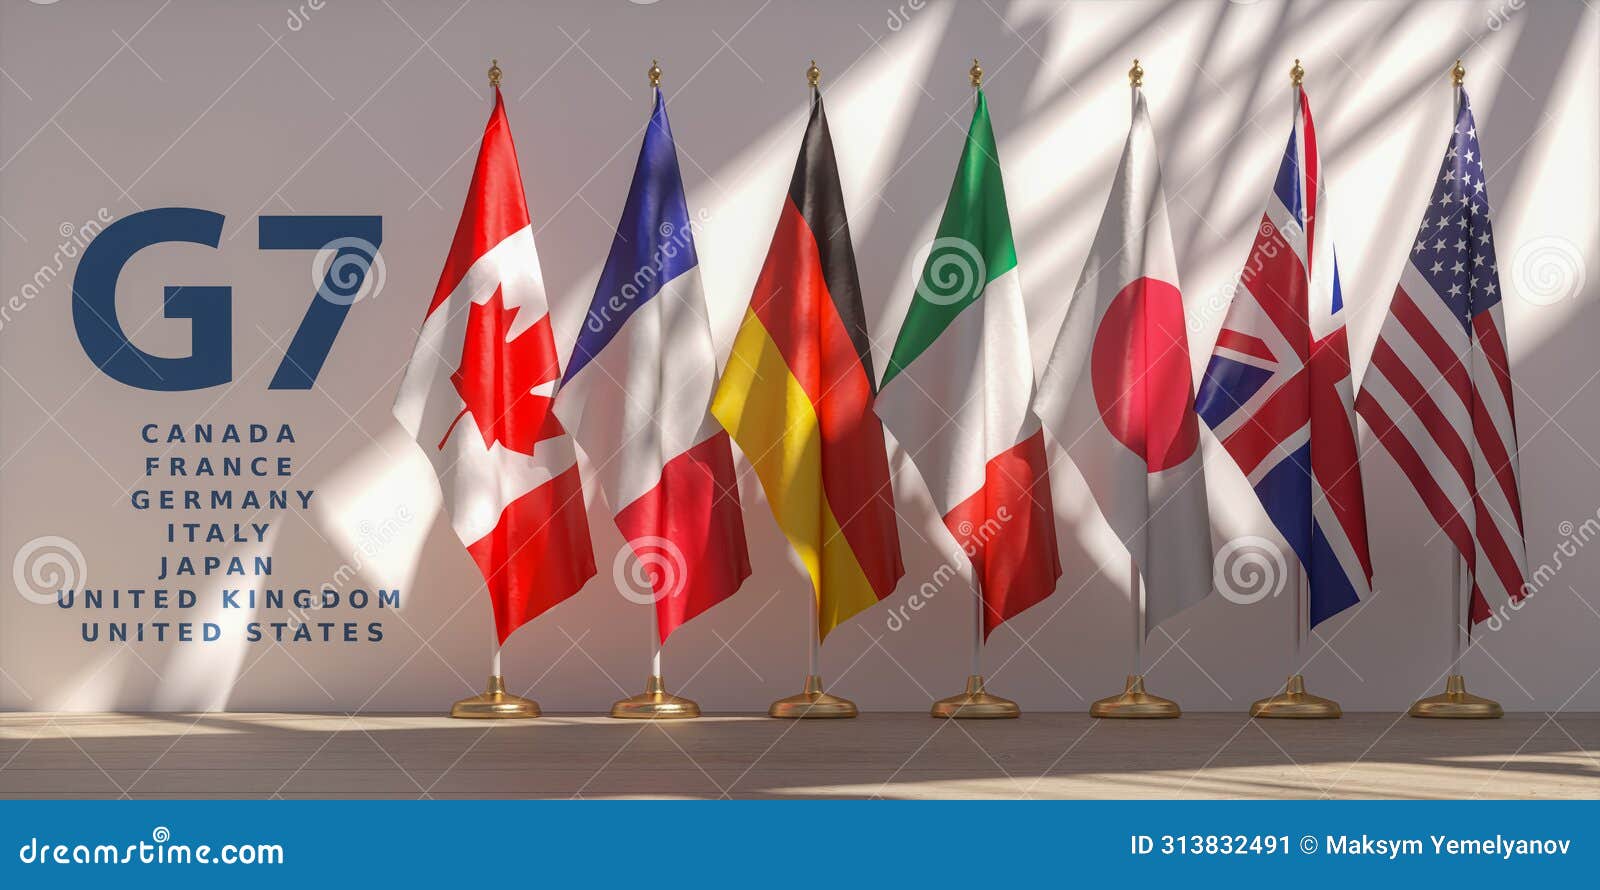 g7 summit or meeting concept. row from flags of members of g7 group of seven and list of countries